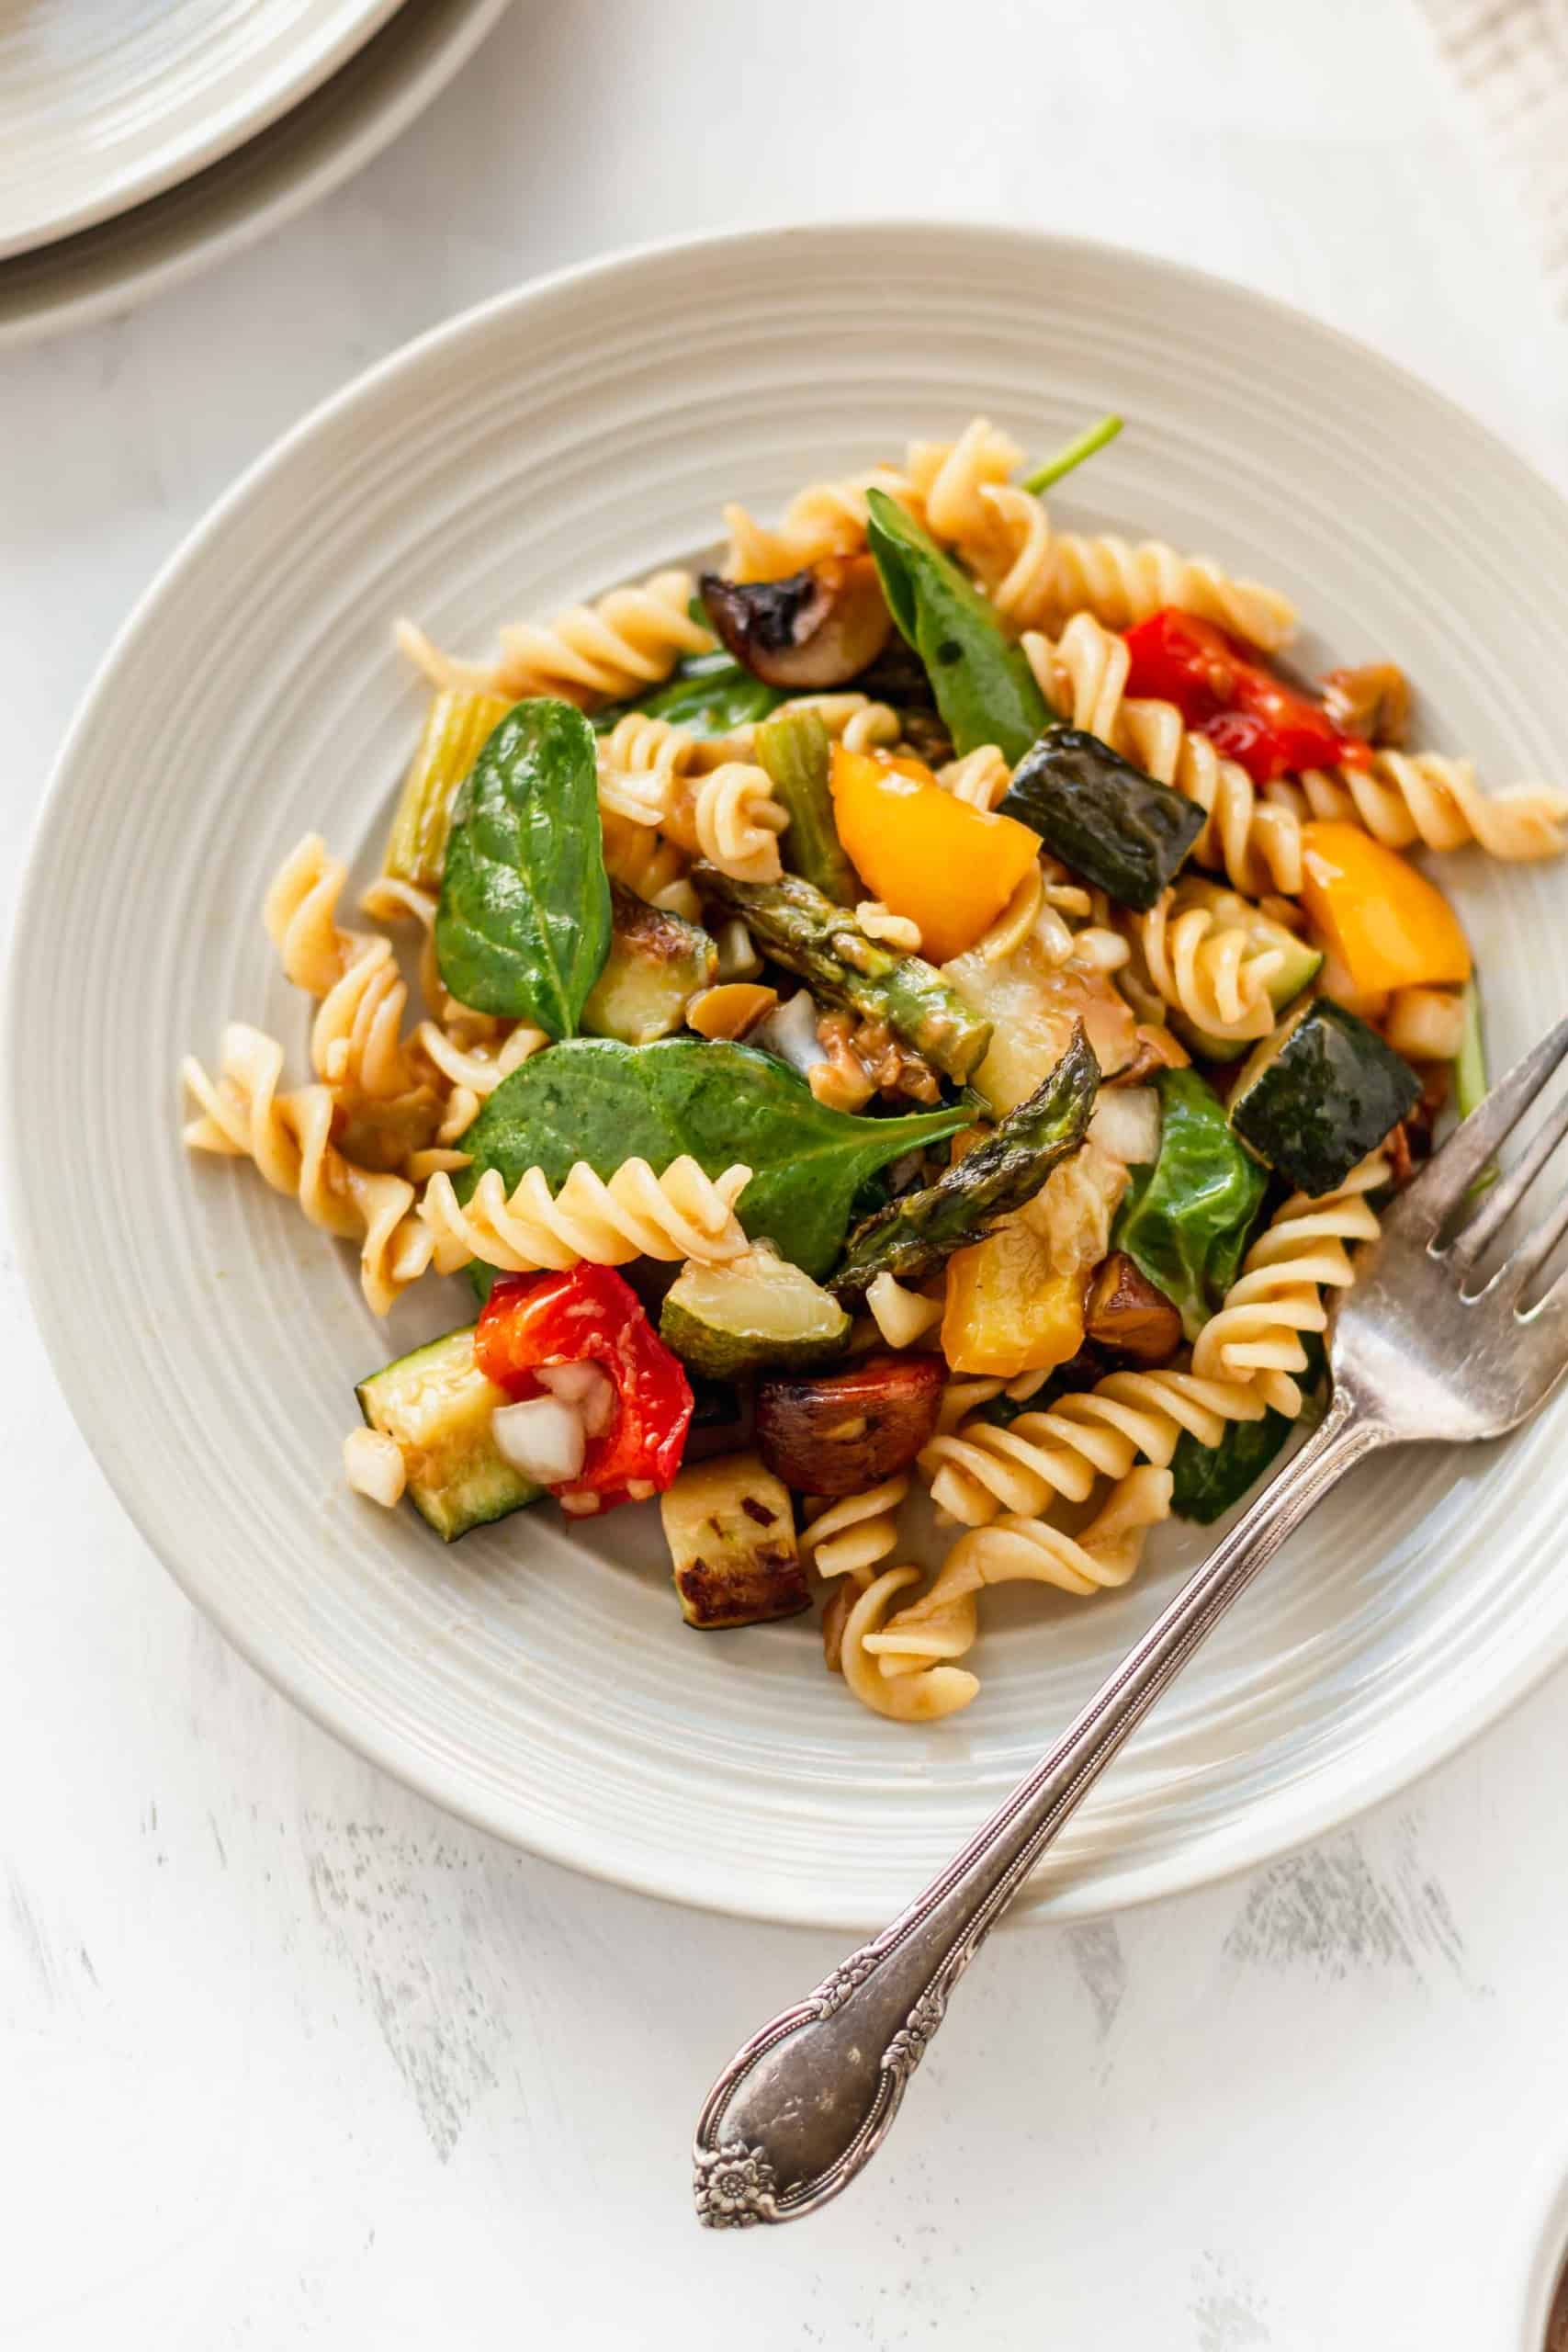 A plate of gluten-free pasta salad